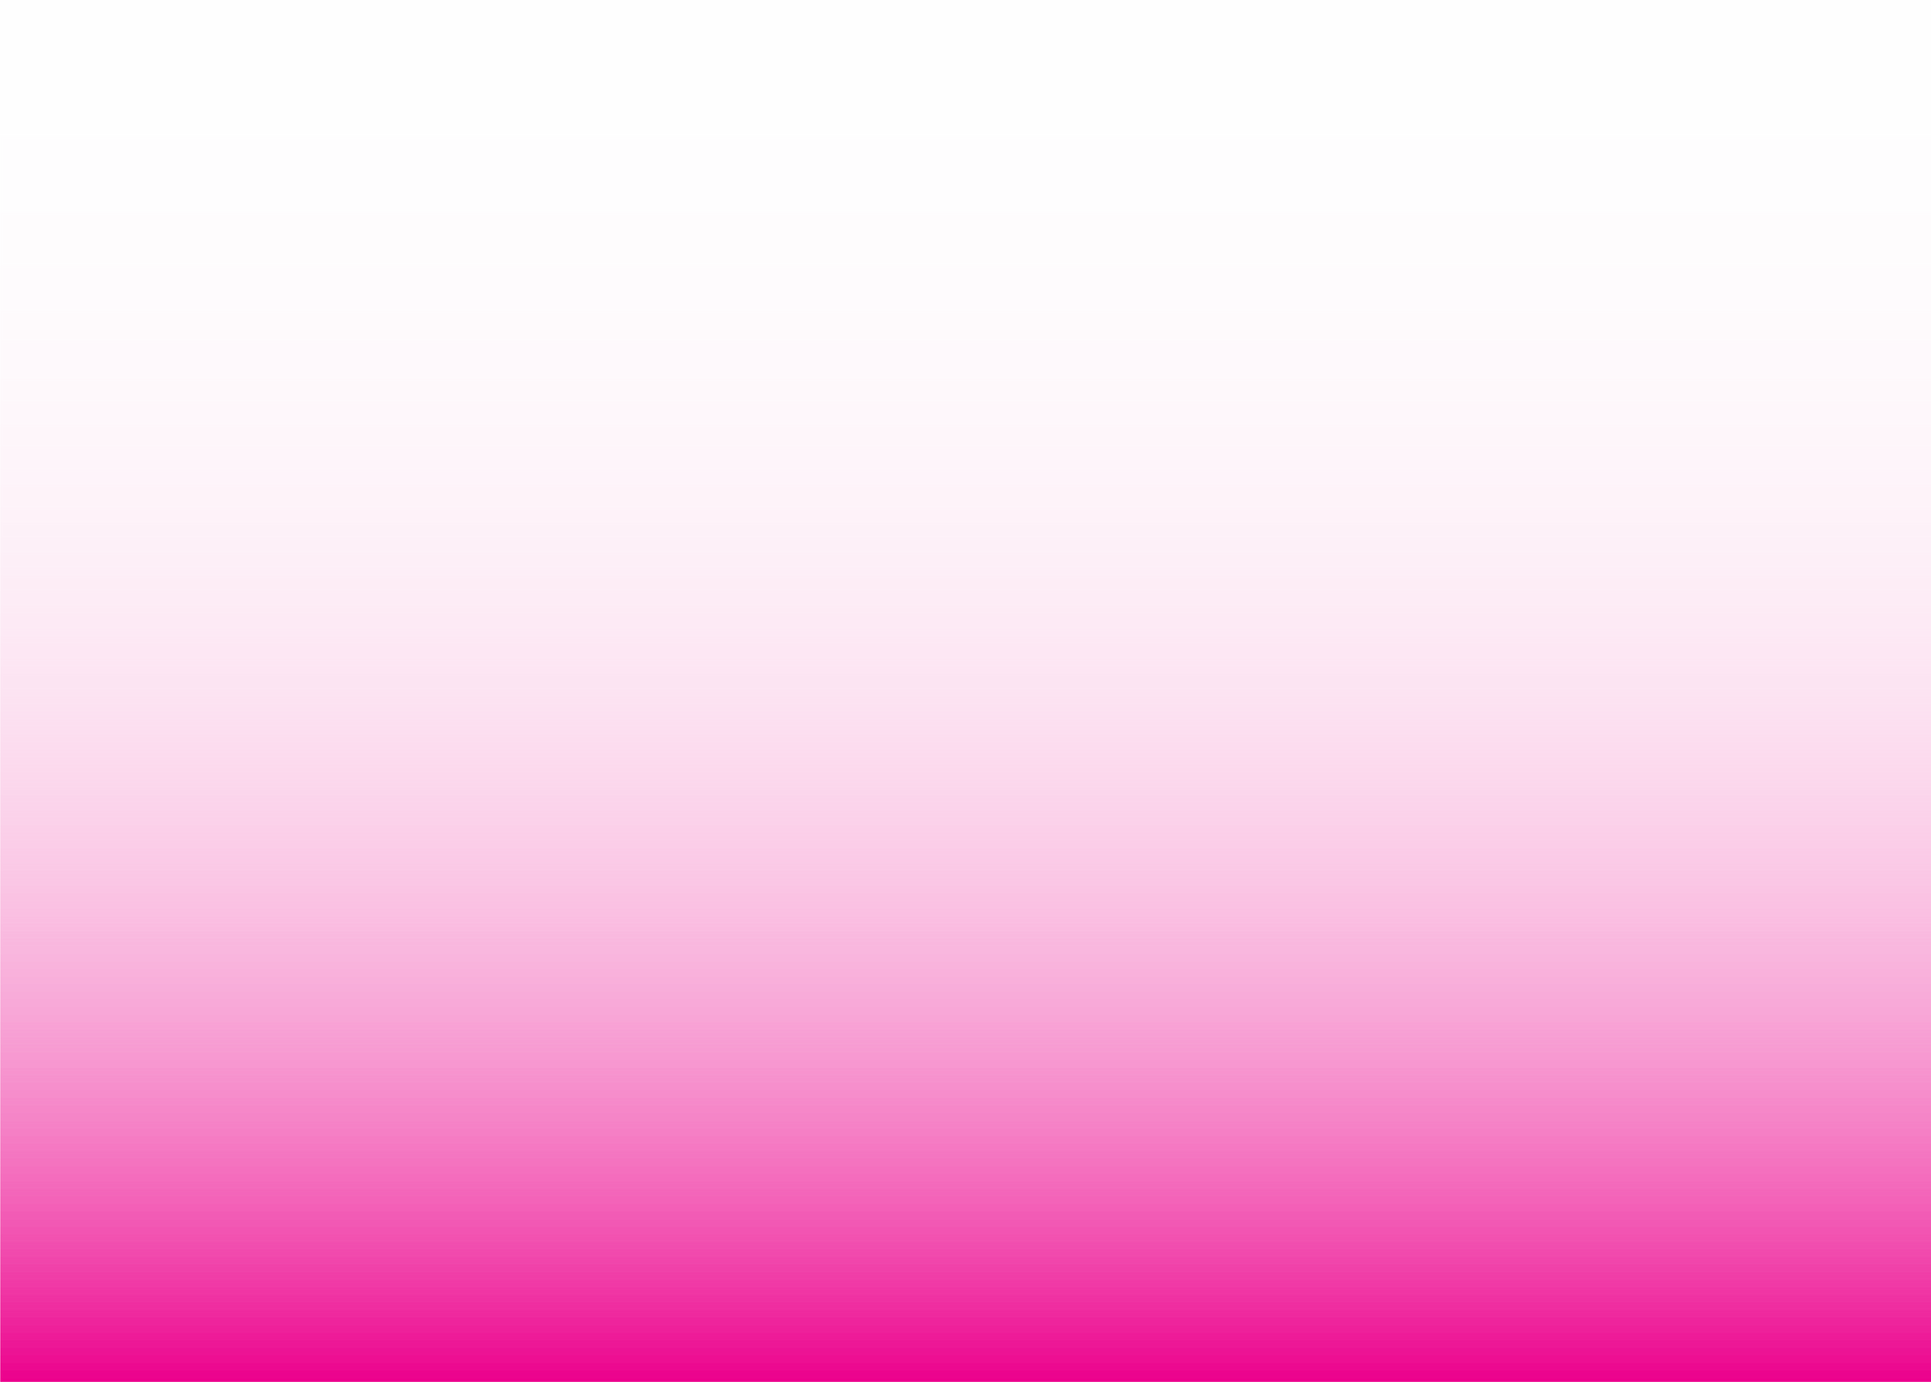 Pink Gradient That Fades To Transparency